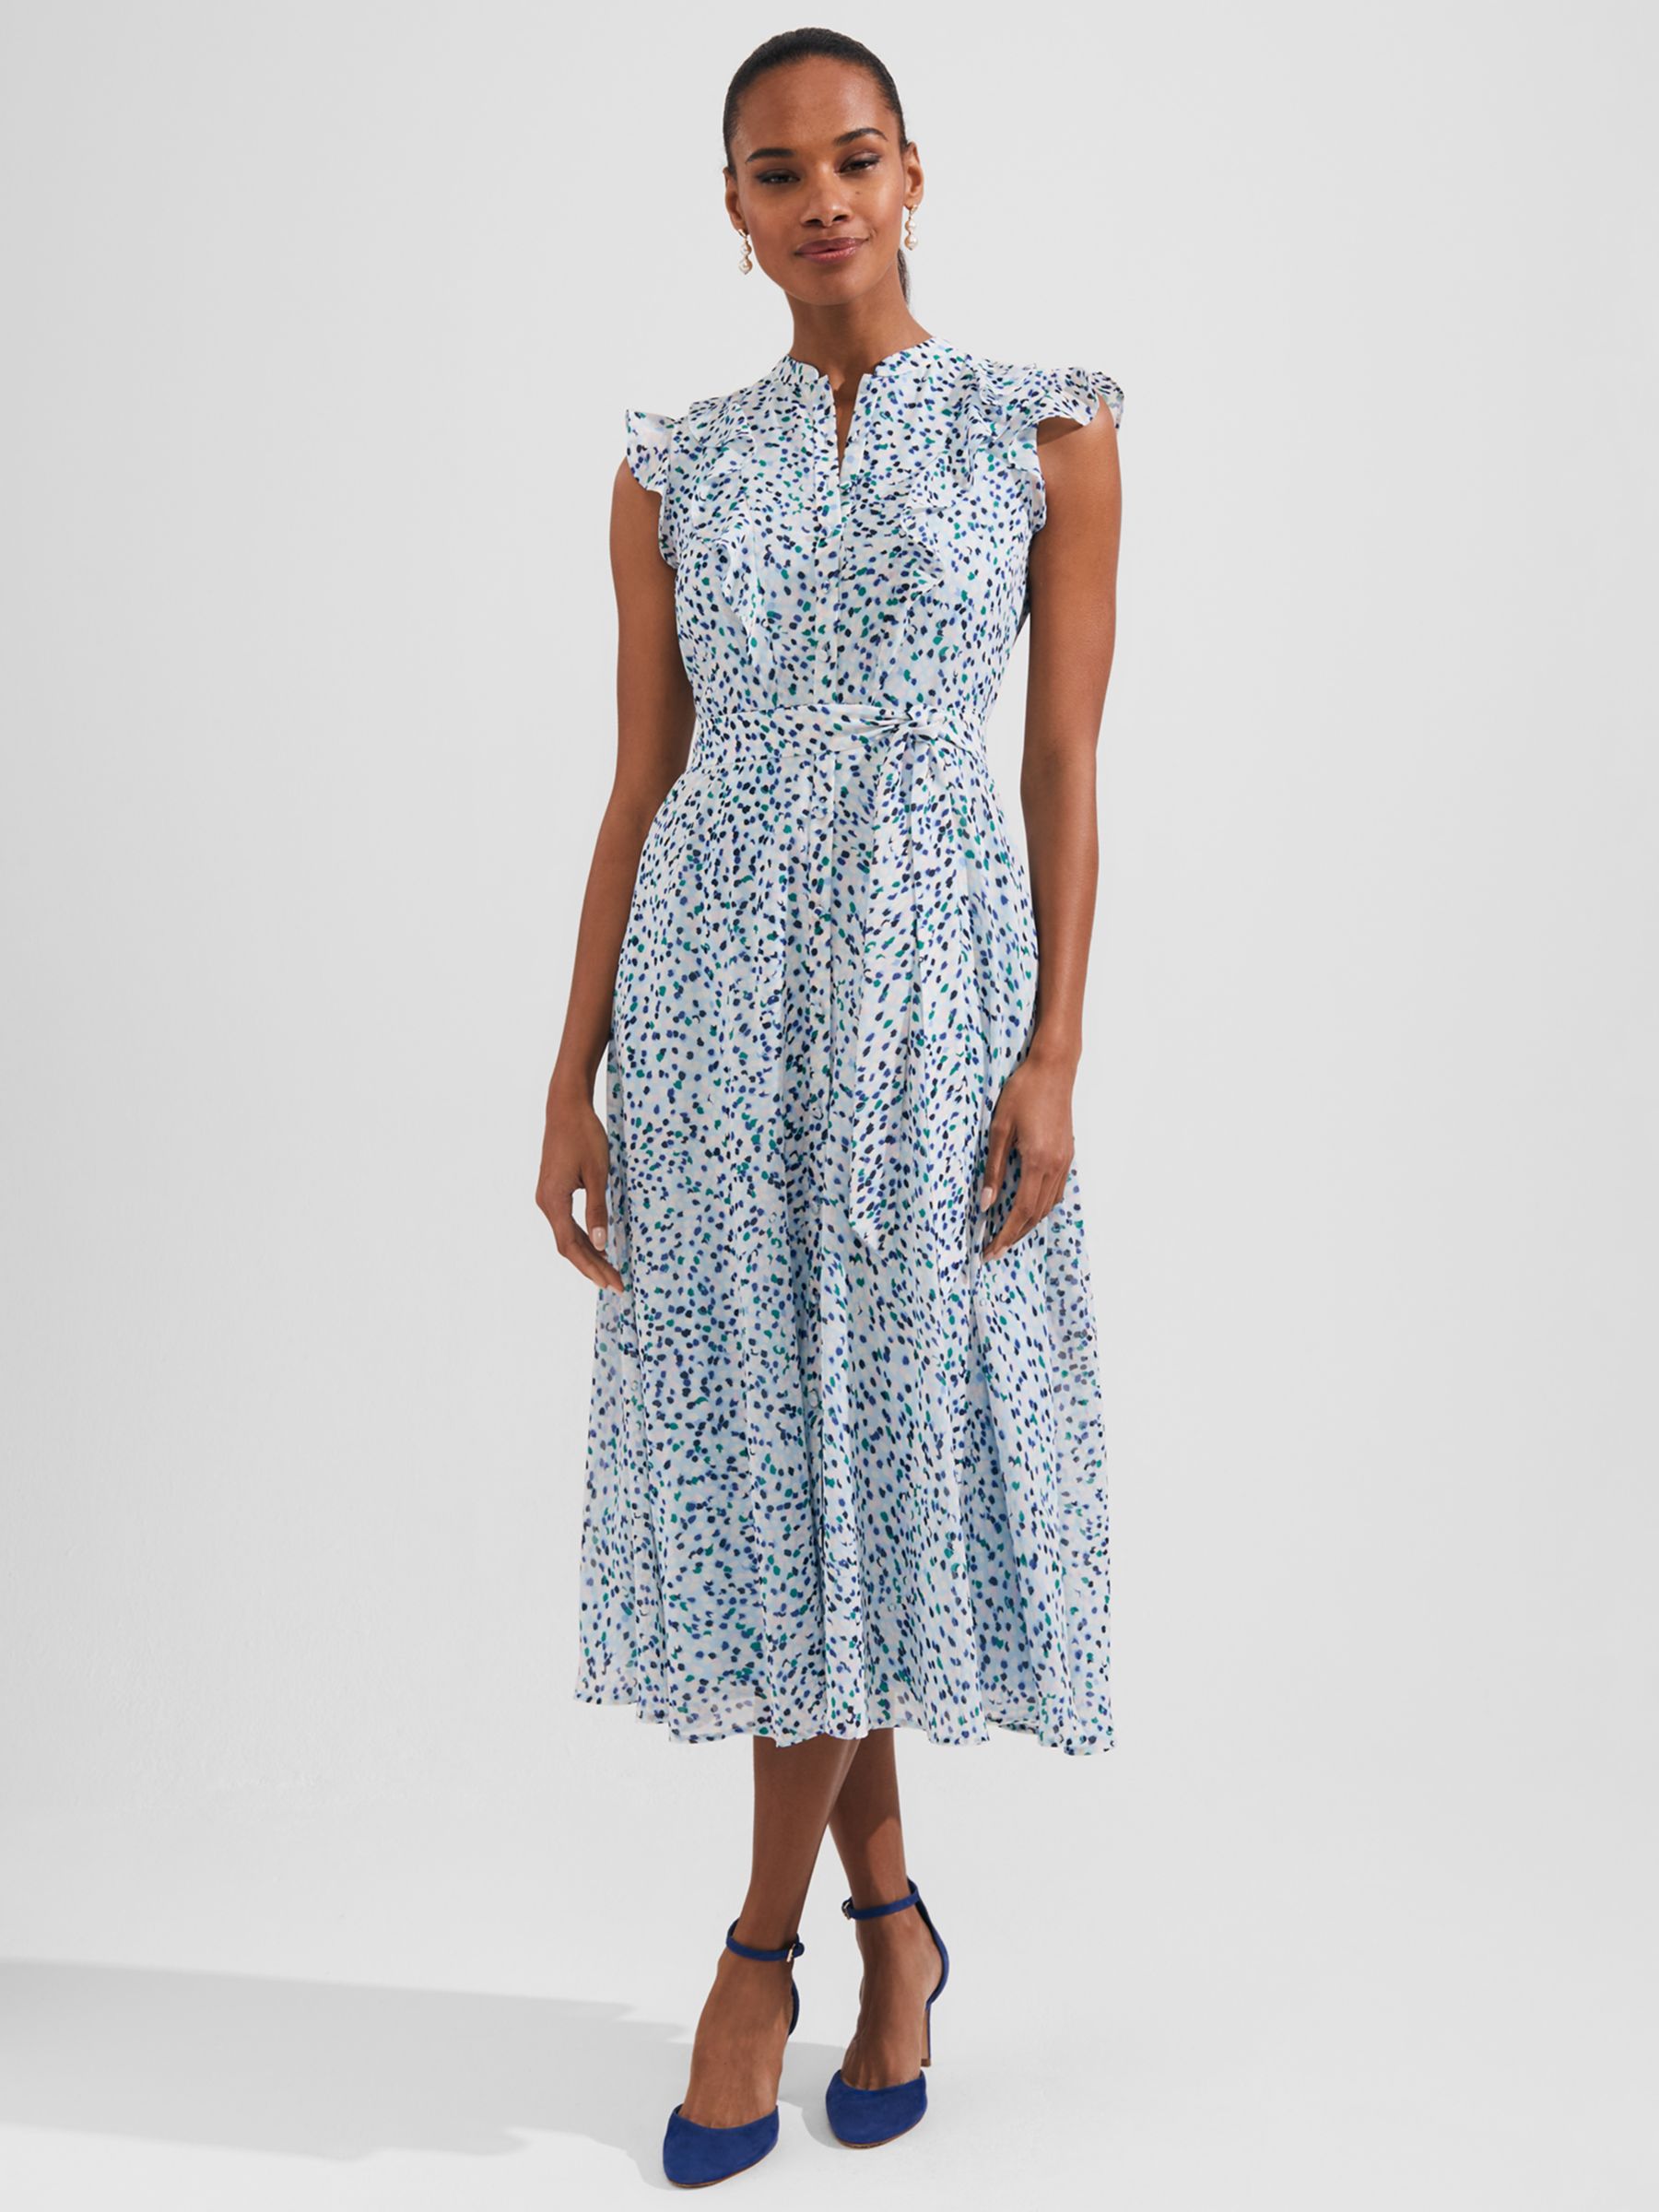 Wedding Guest Dresses for Every Style, Hobbs, Hobbs